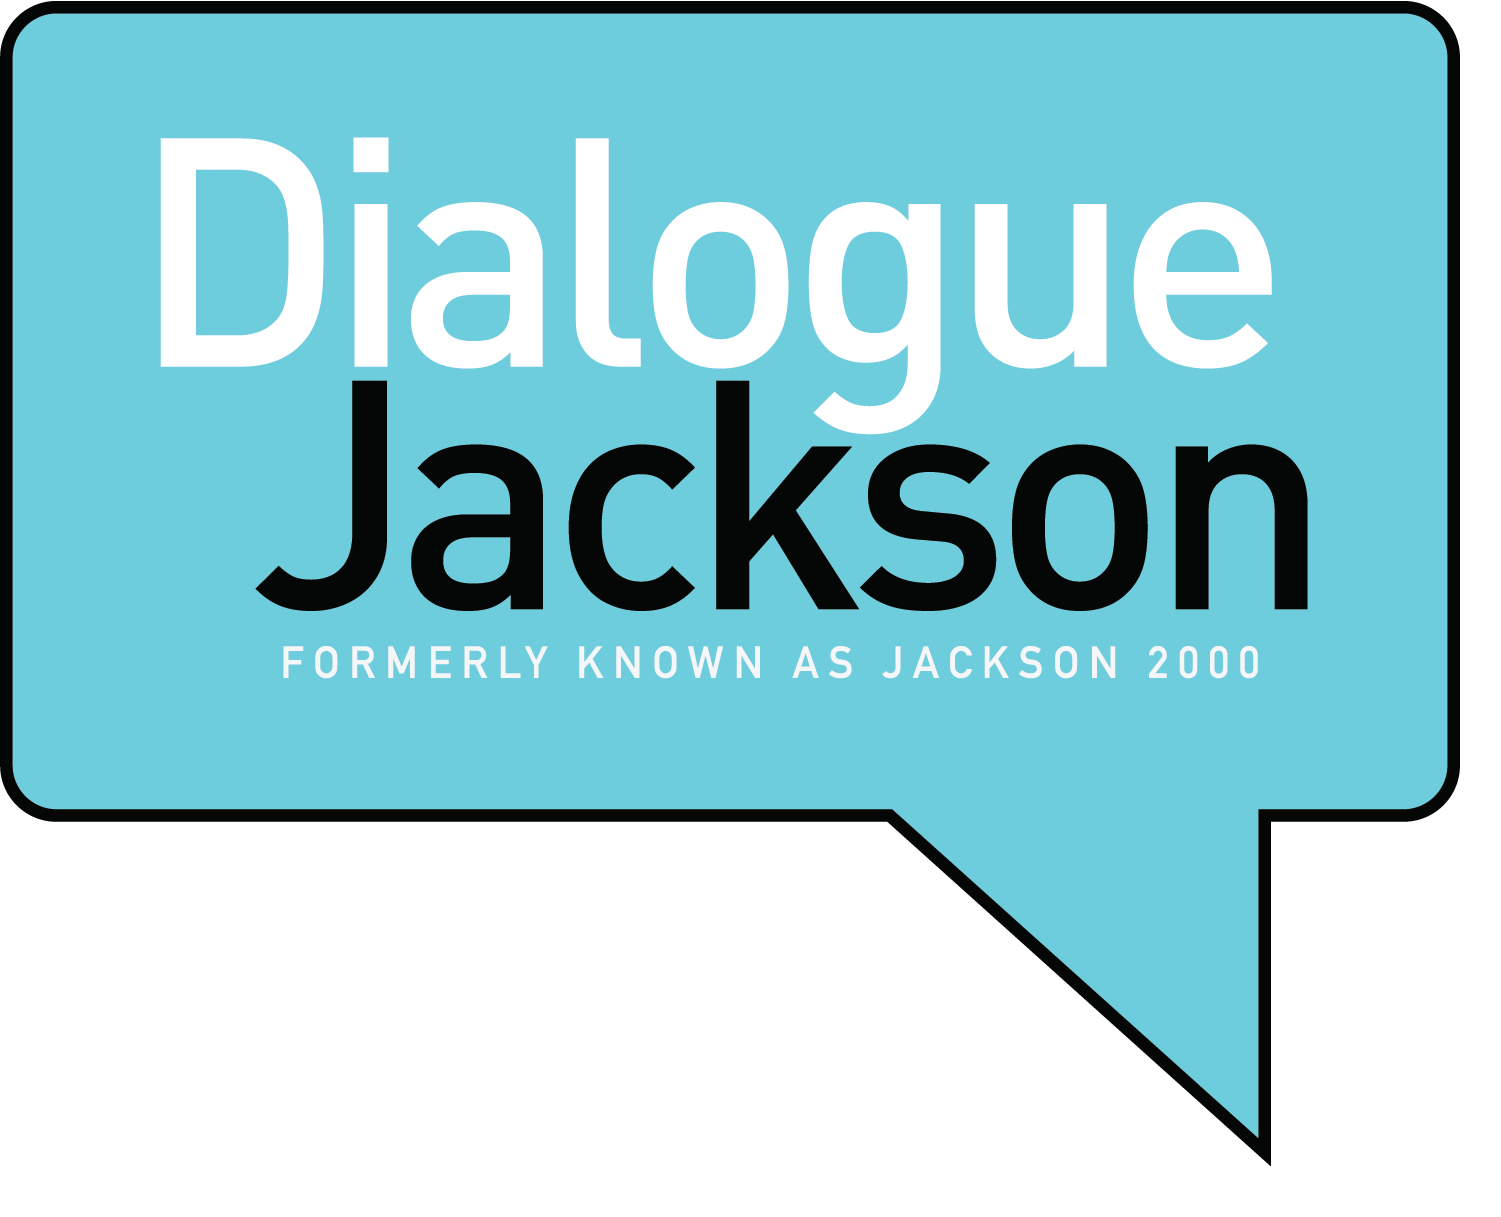 Dialogue jackson events . Luncheon clipart lunch bunch